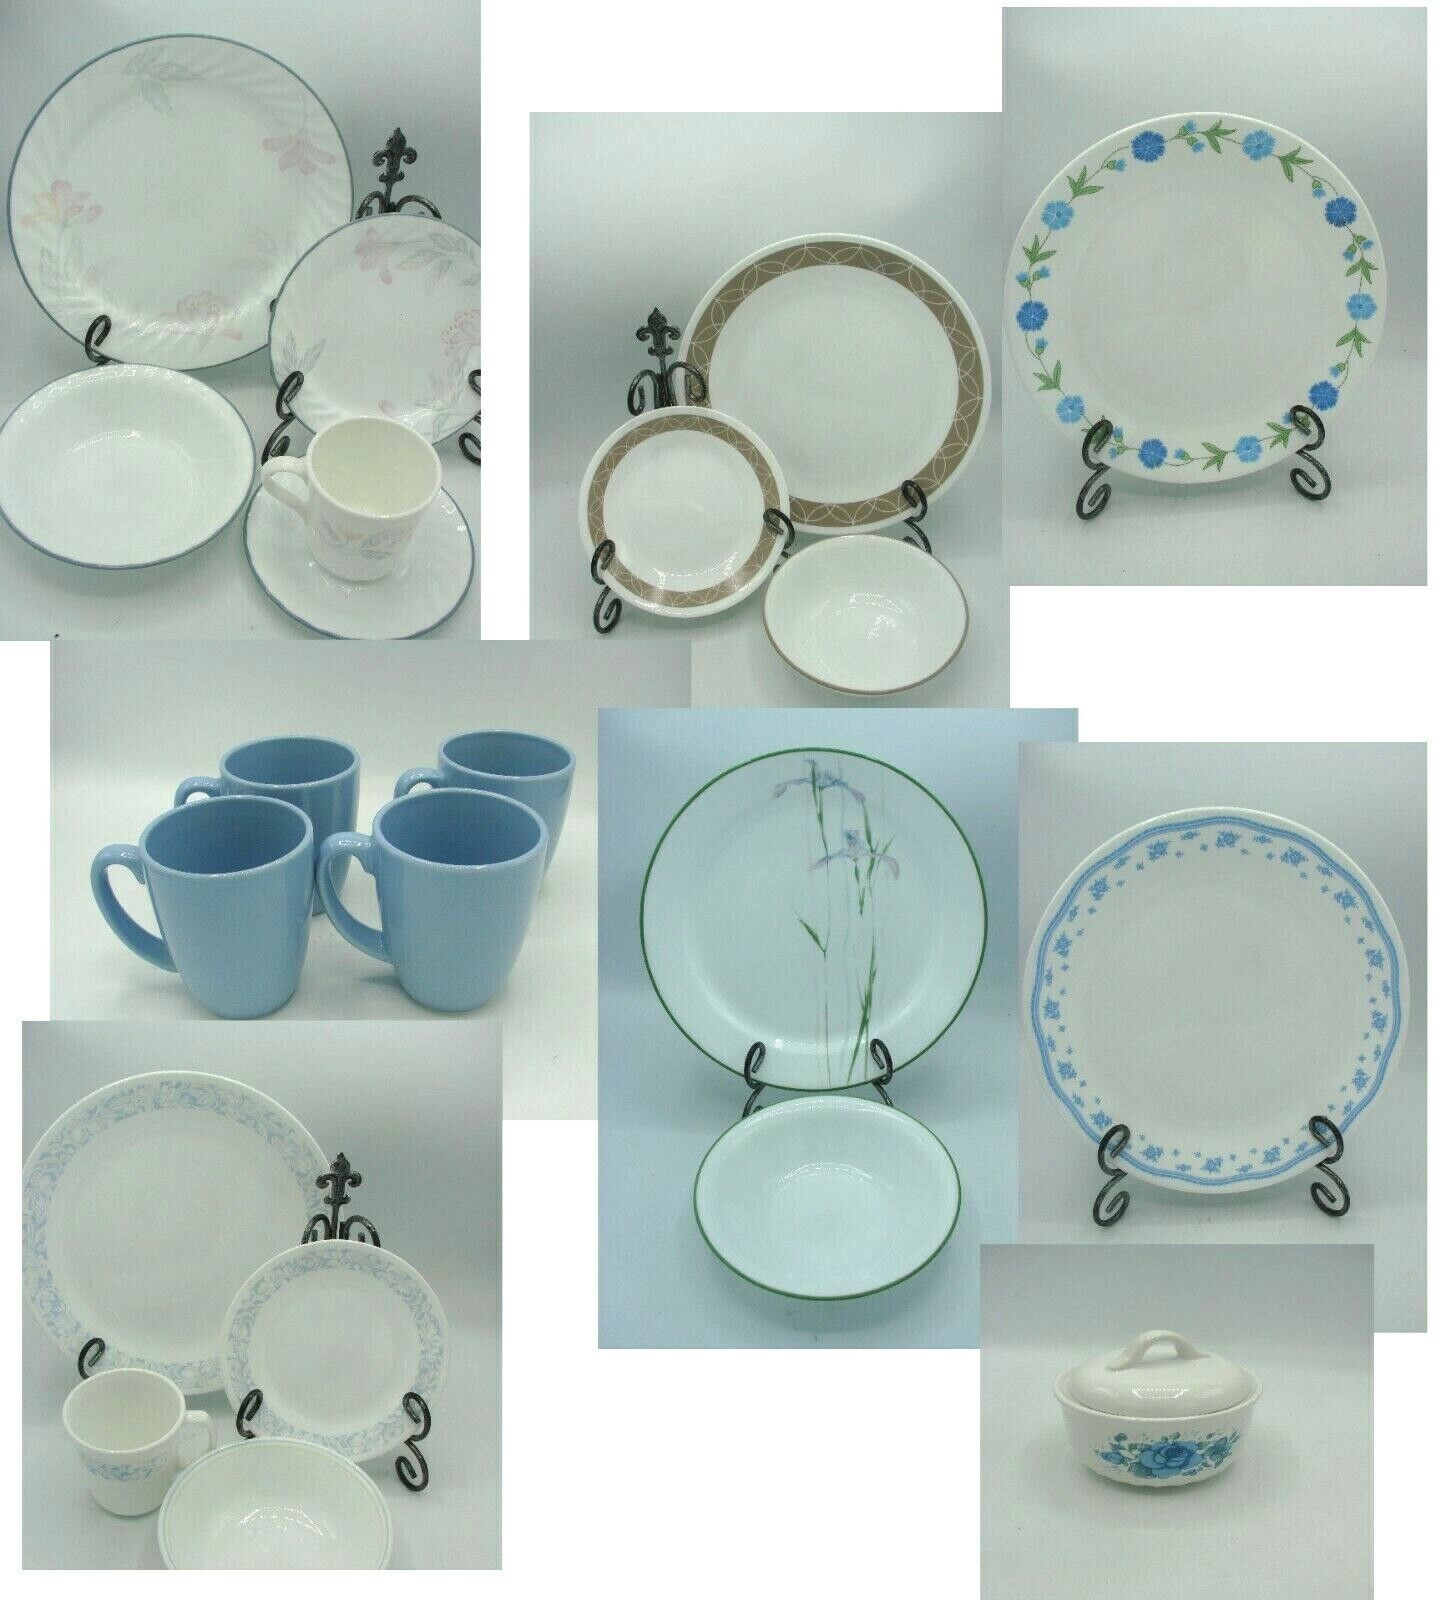 Corelle Dishes Corning Ware Cordinates  Dinner Plate Salad Cereal Bowl Stoneware - $6.92 - $22.76